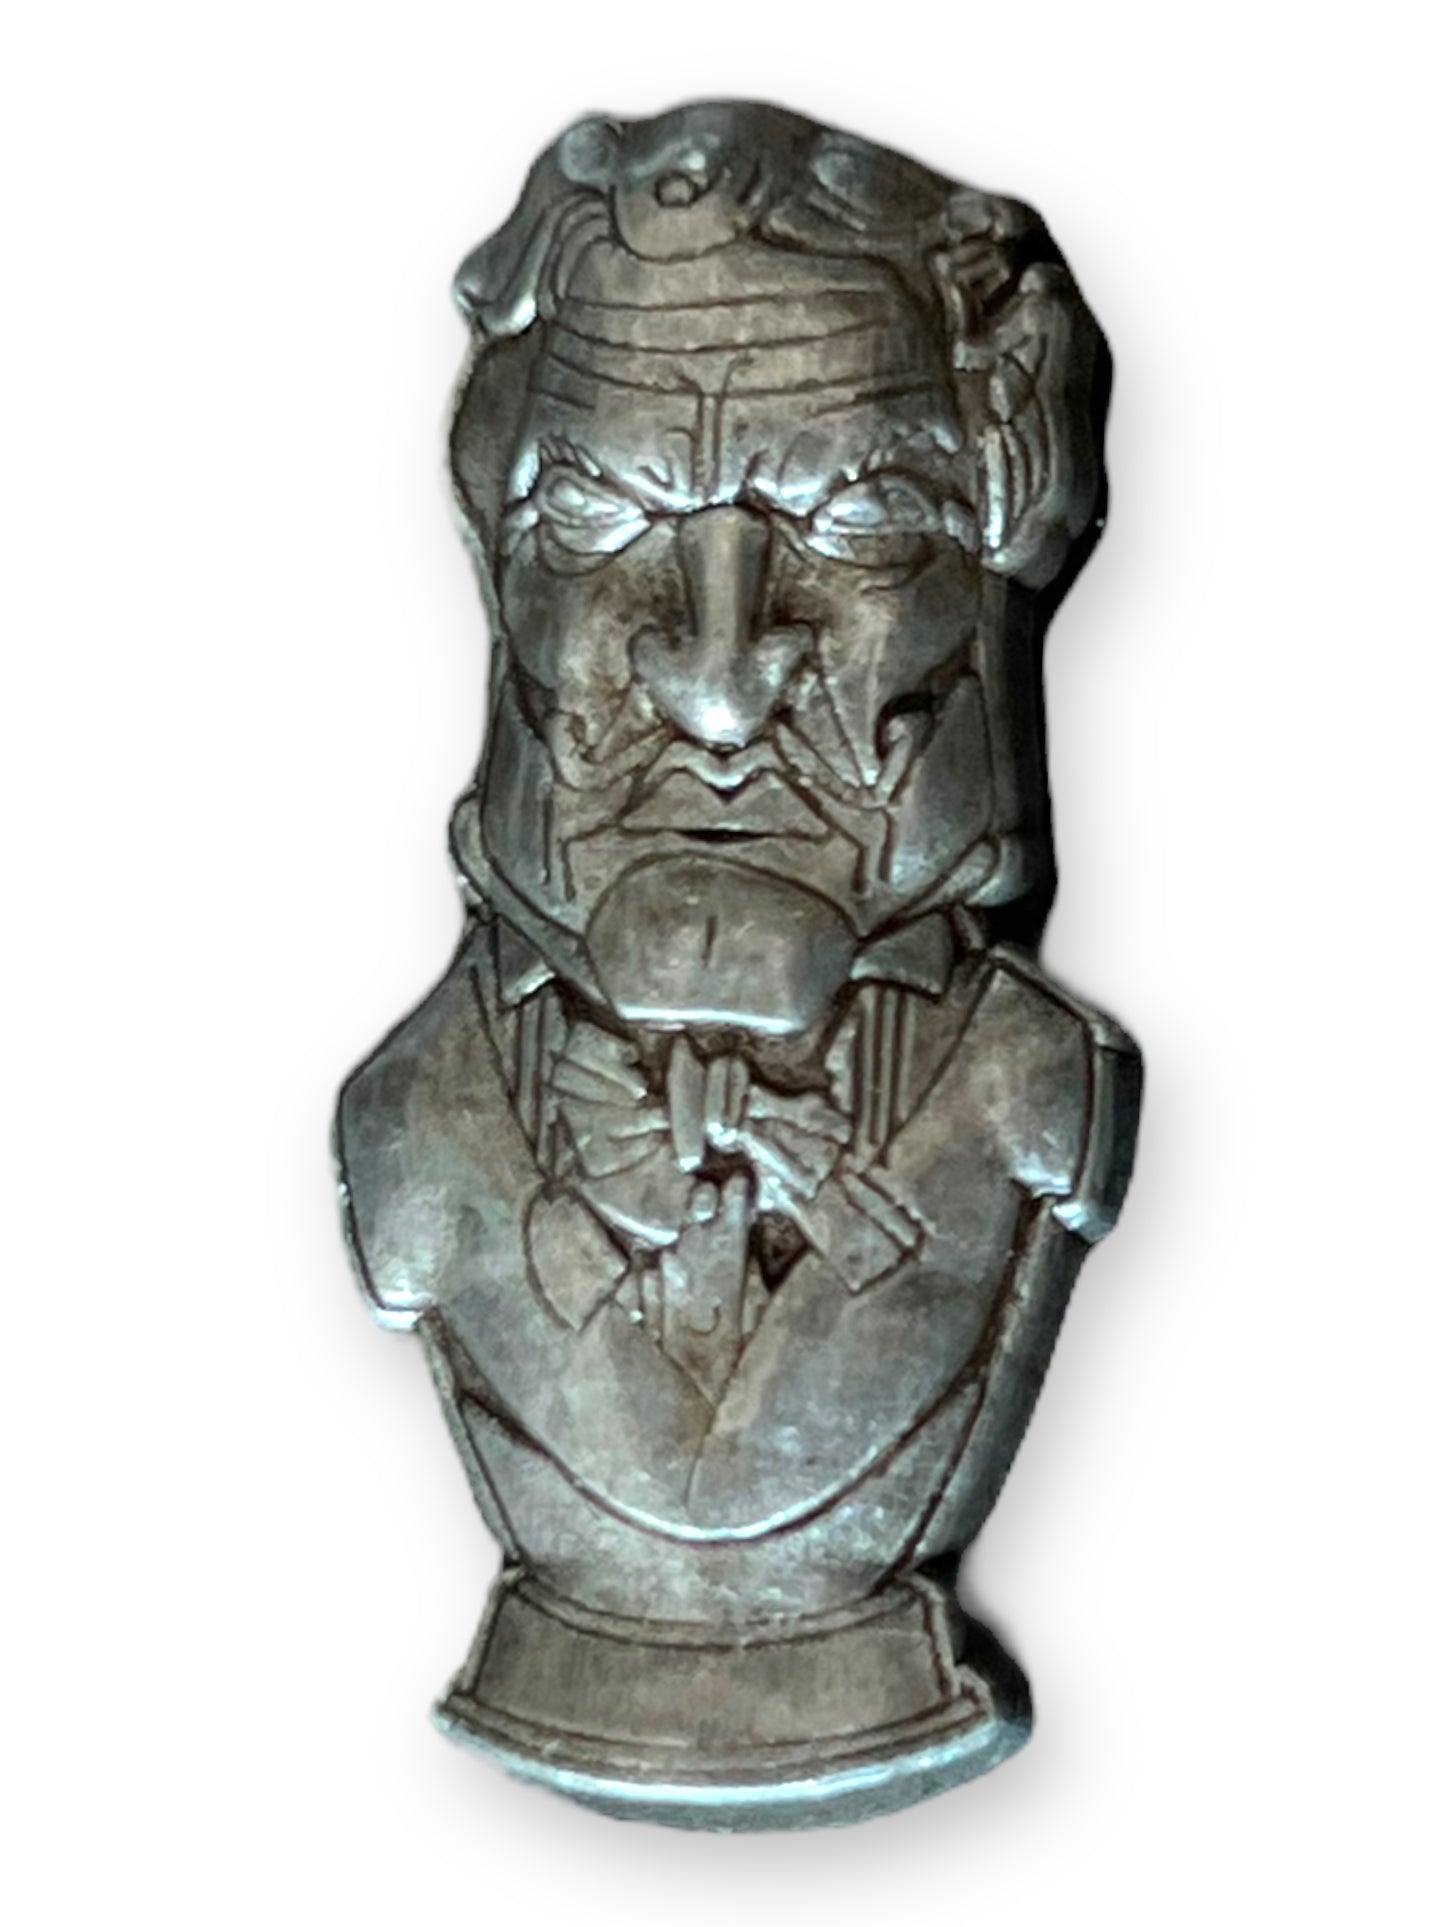 DSSH Haunted Mansion Statue Bust #3 Pin